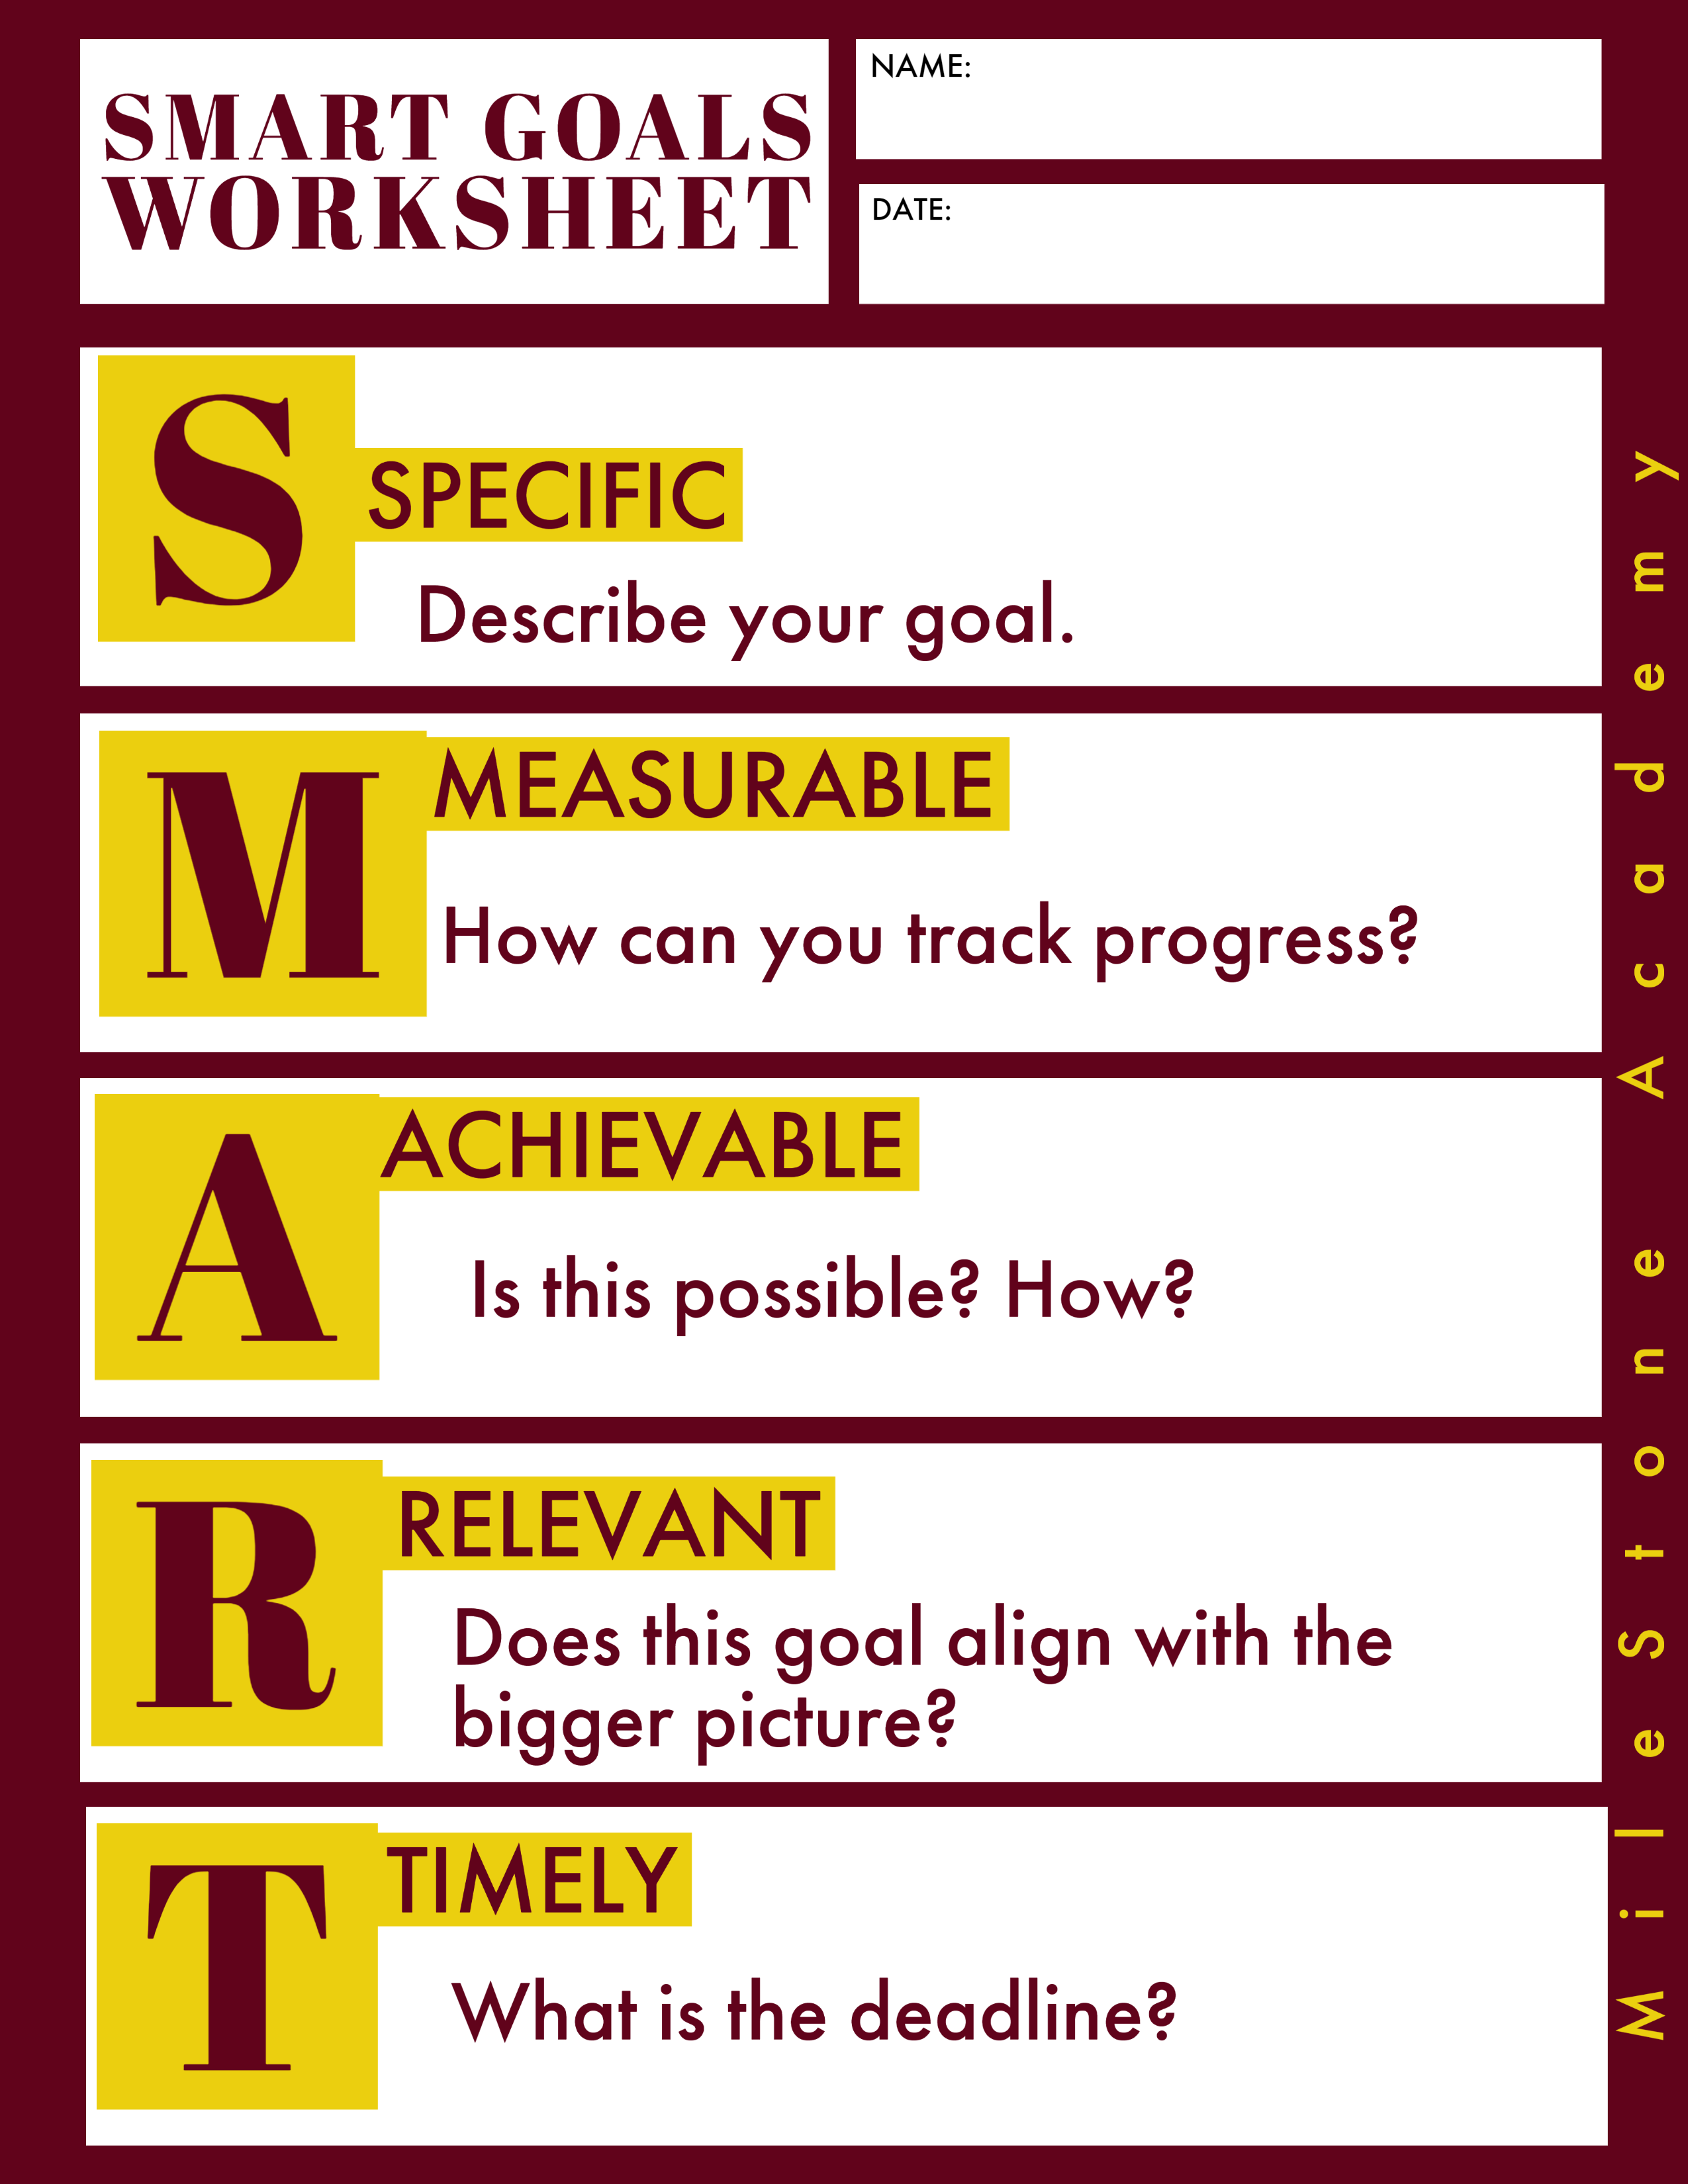 Introduction to SMART Goals 